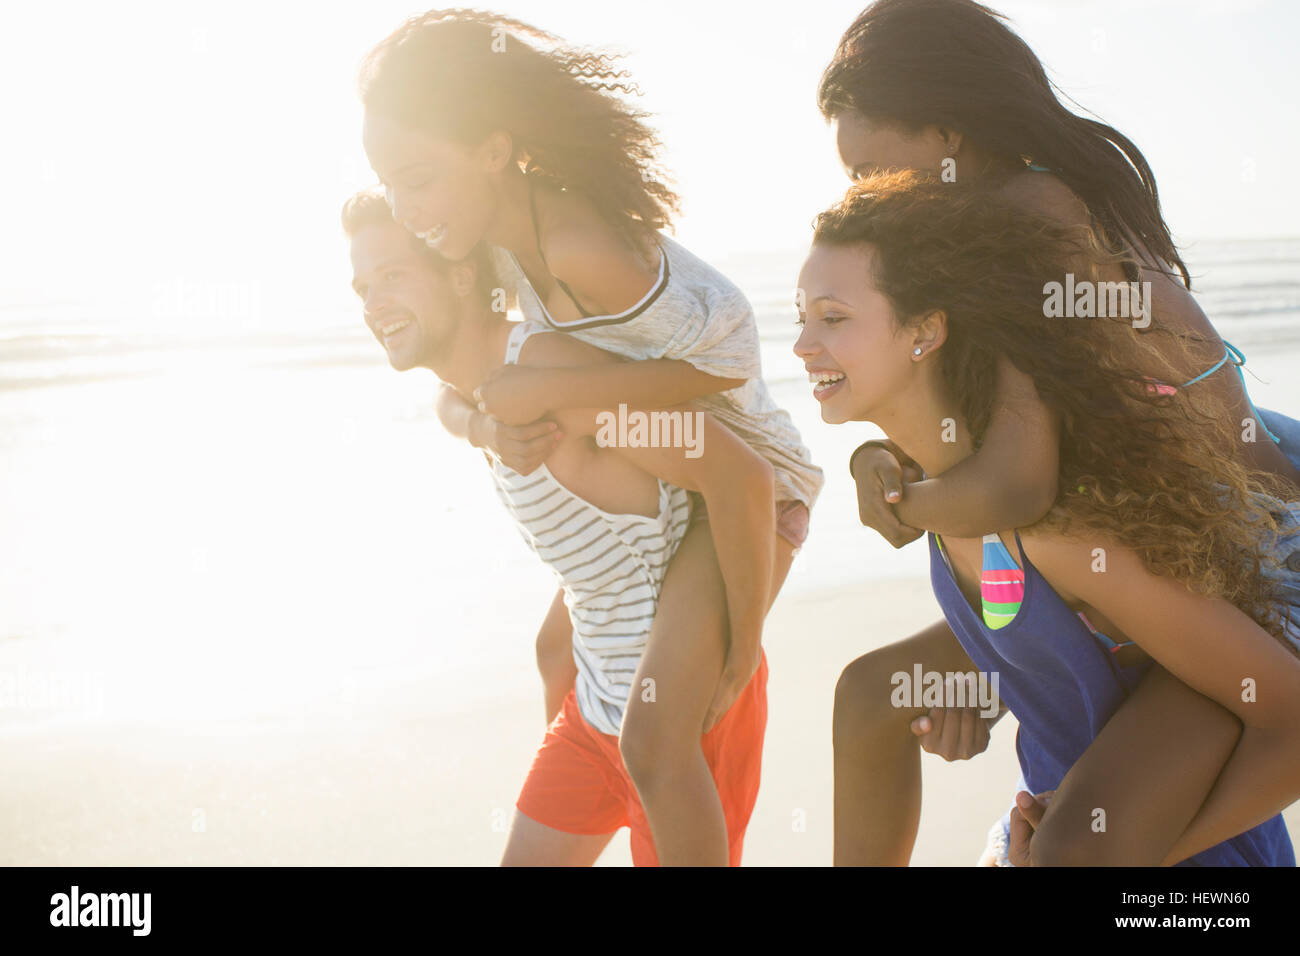 Young man and woman piggybacking friends on sunlit beach, Cape Town, South Africa Stock Photo